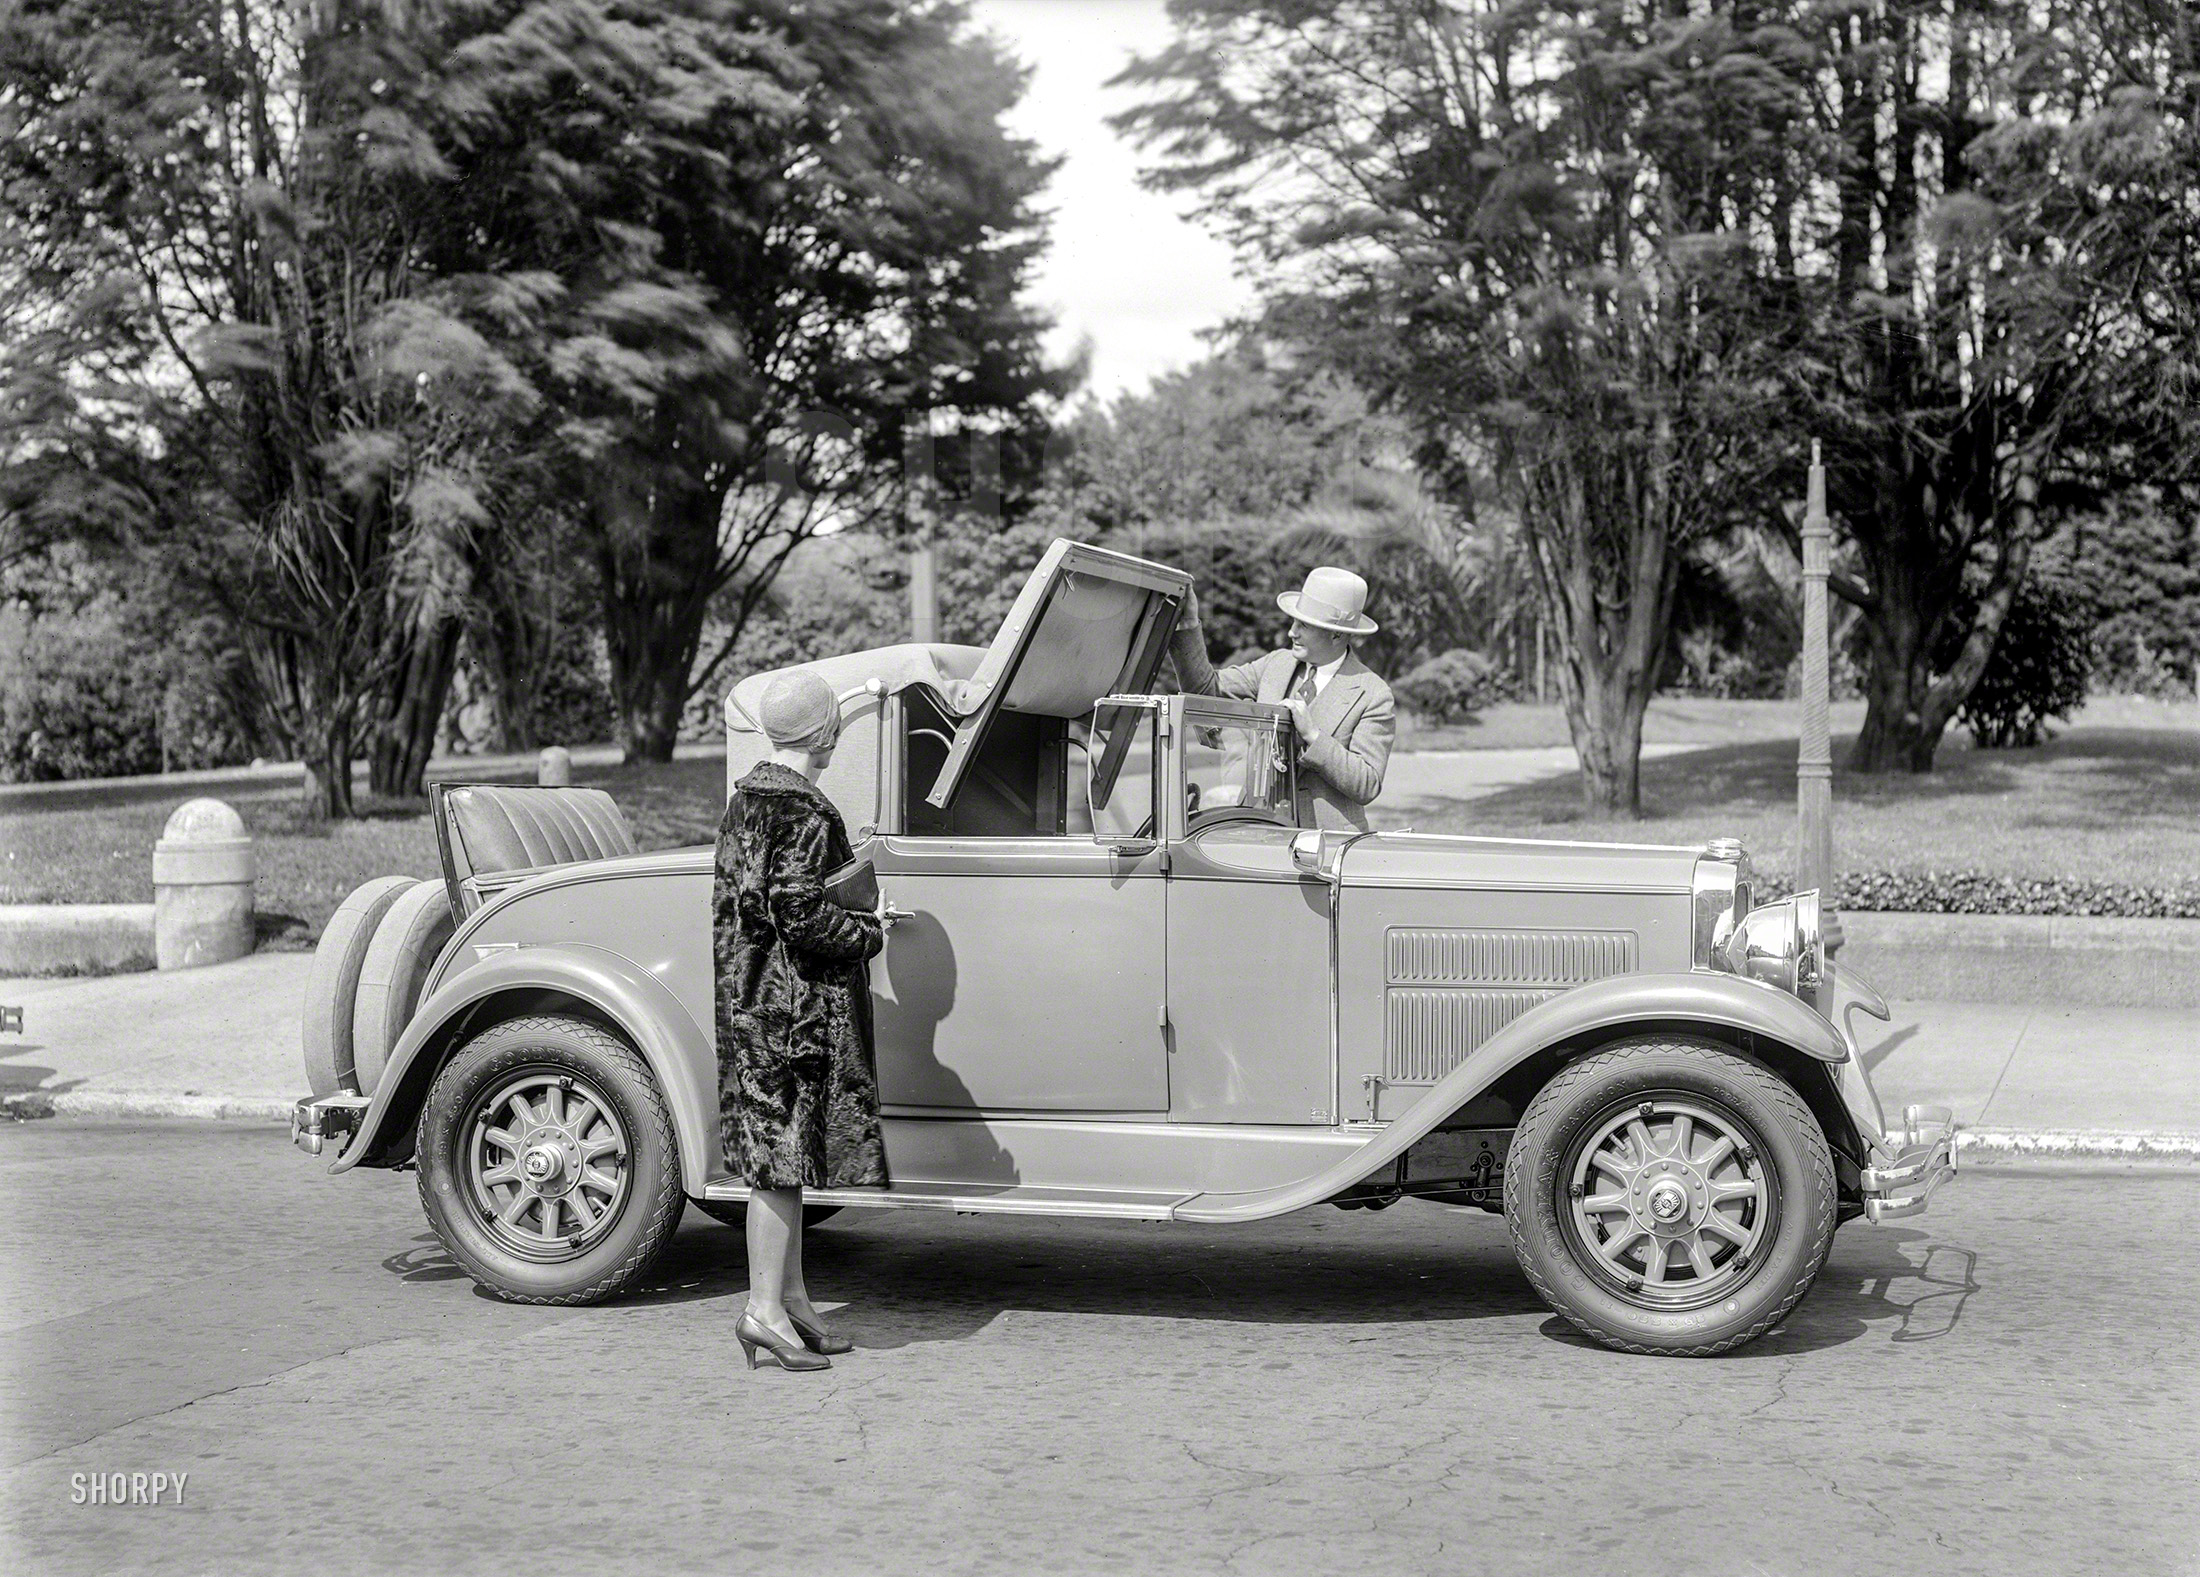 San Francisco, 1929. "Nash convertible coupe at Golden Gate Park." Heading into the Depression in style. 5x7 glass negative by Christopher Helin. View full size.